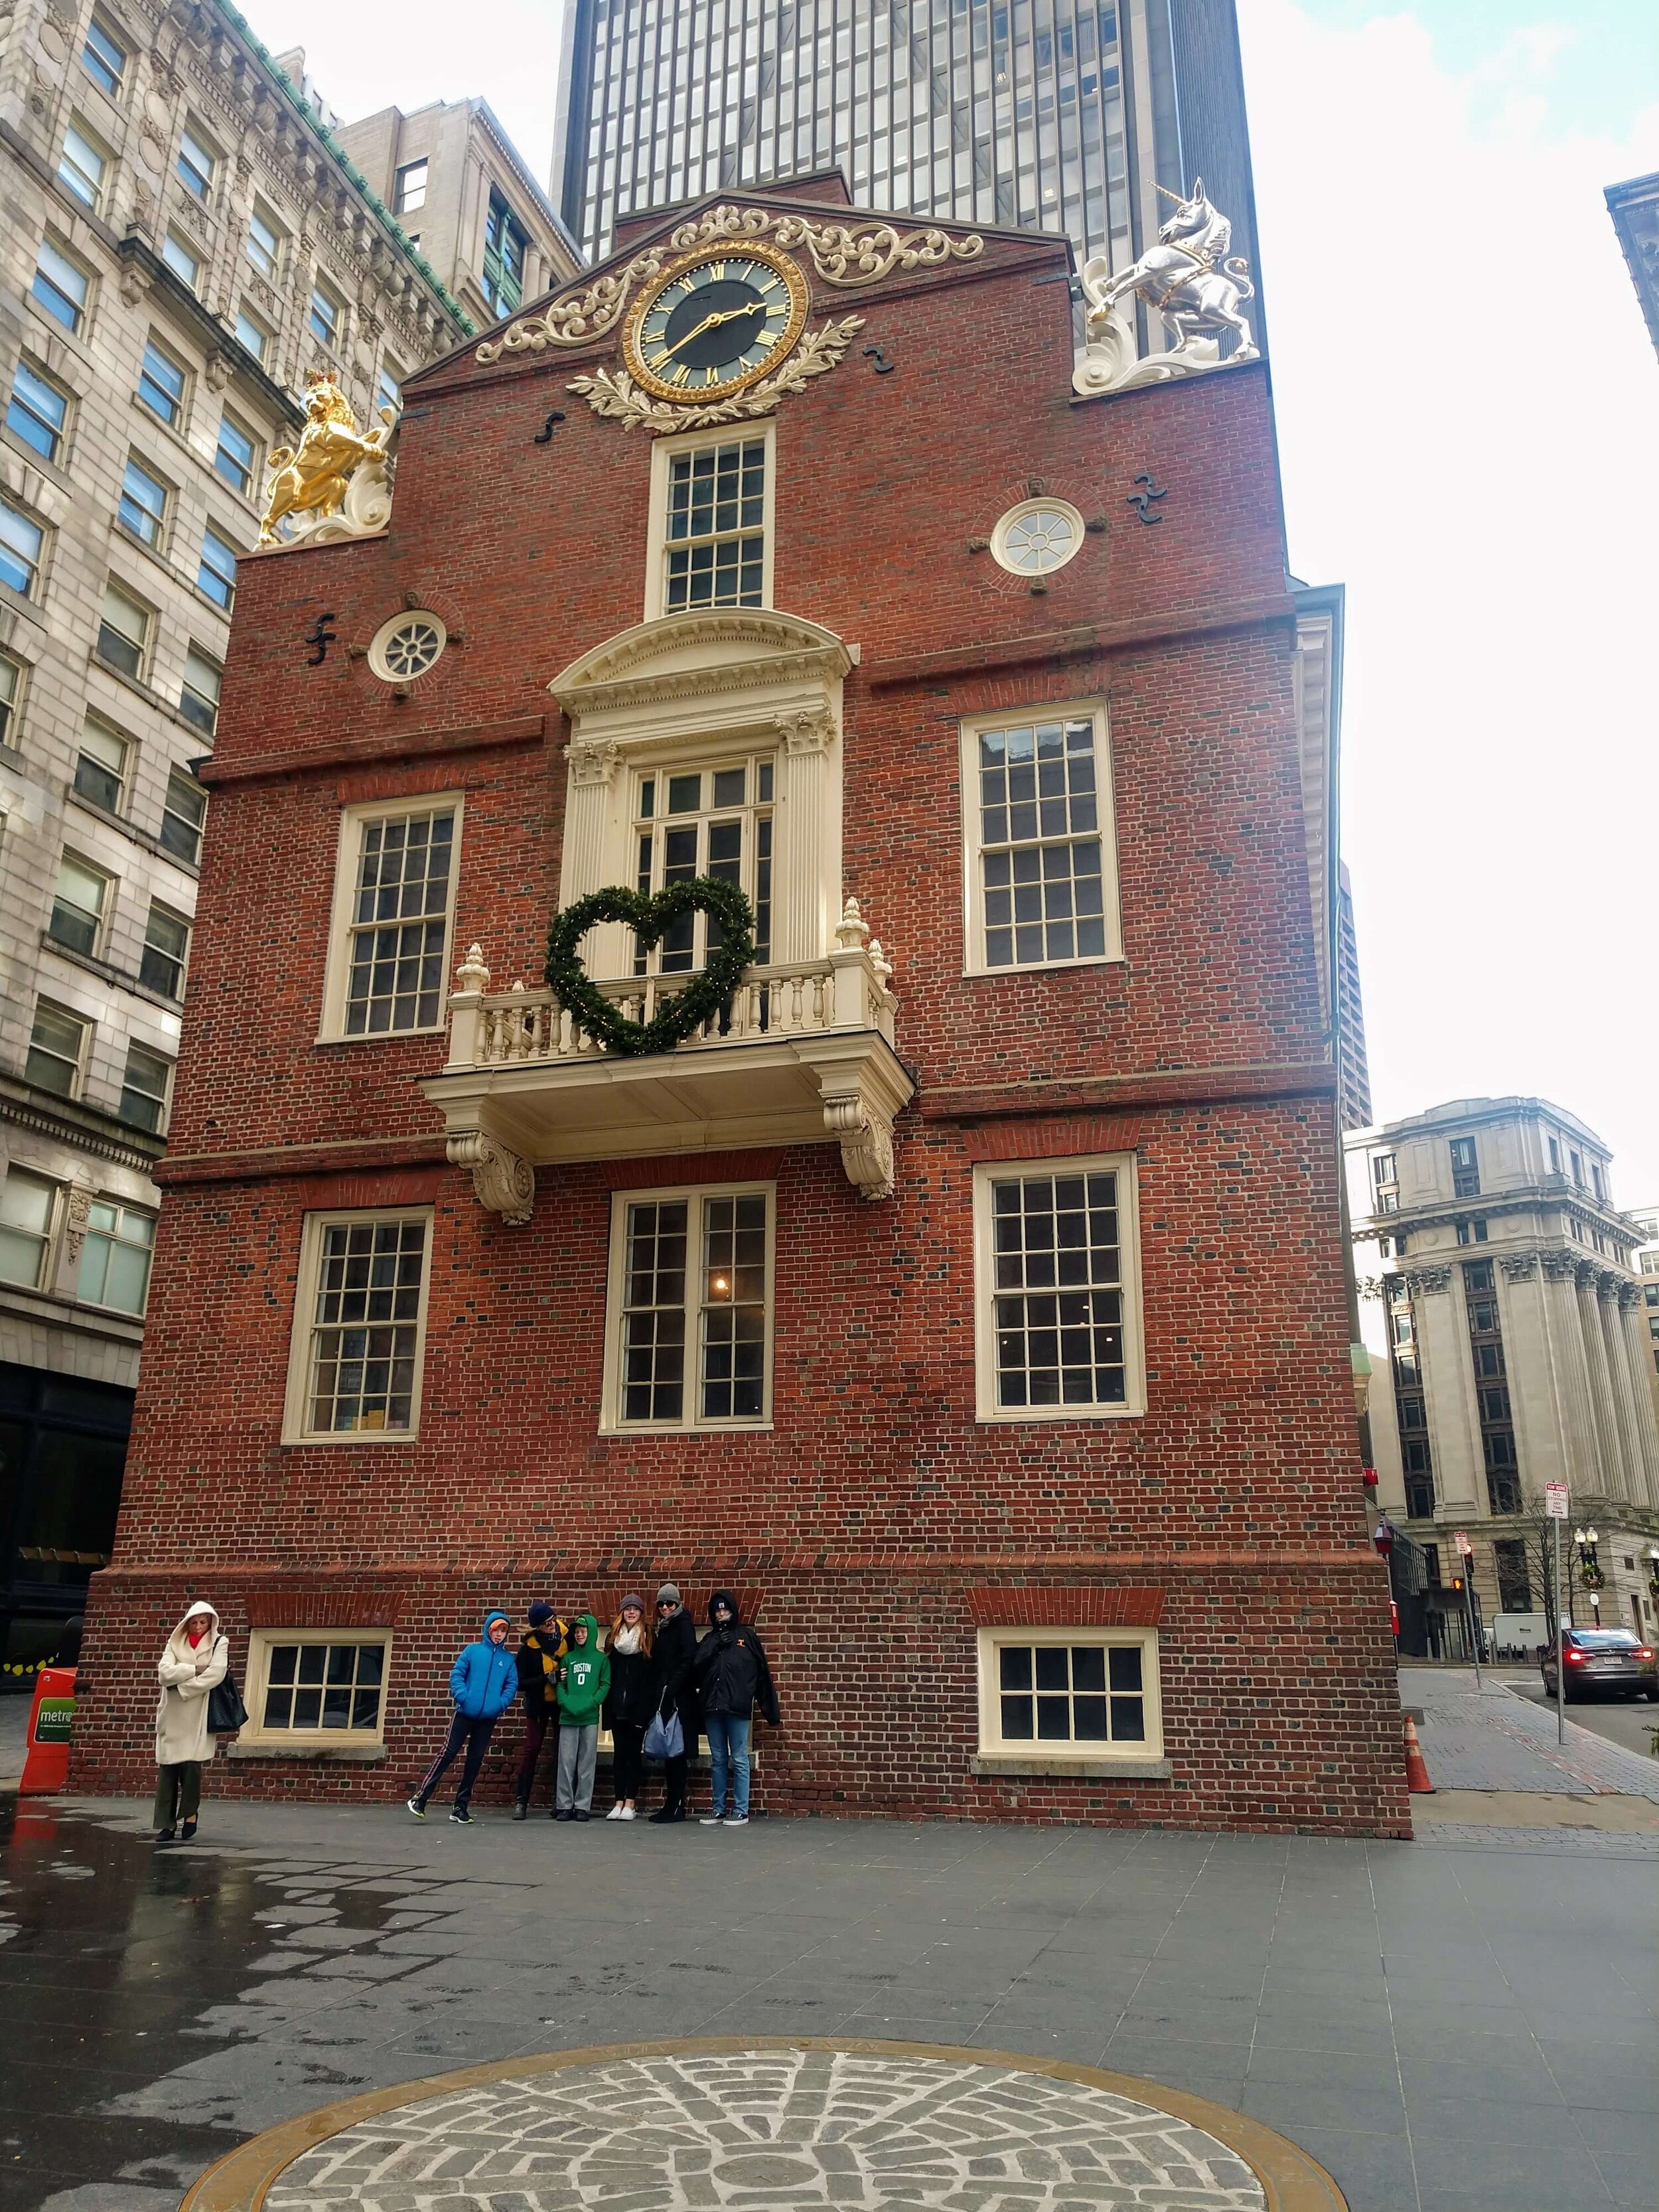  The Old State House and the medallion marking the spot where the Boston Massacre happened. This was one of our windiest days so everyone is extra bundled up. 